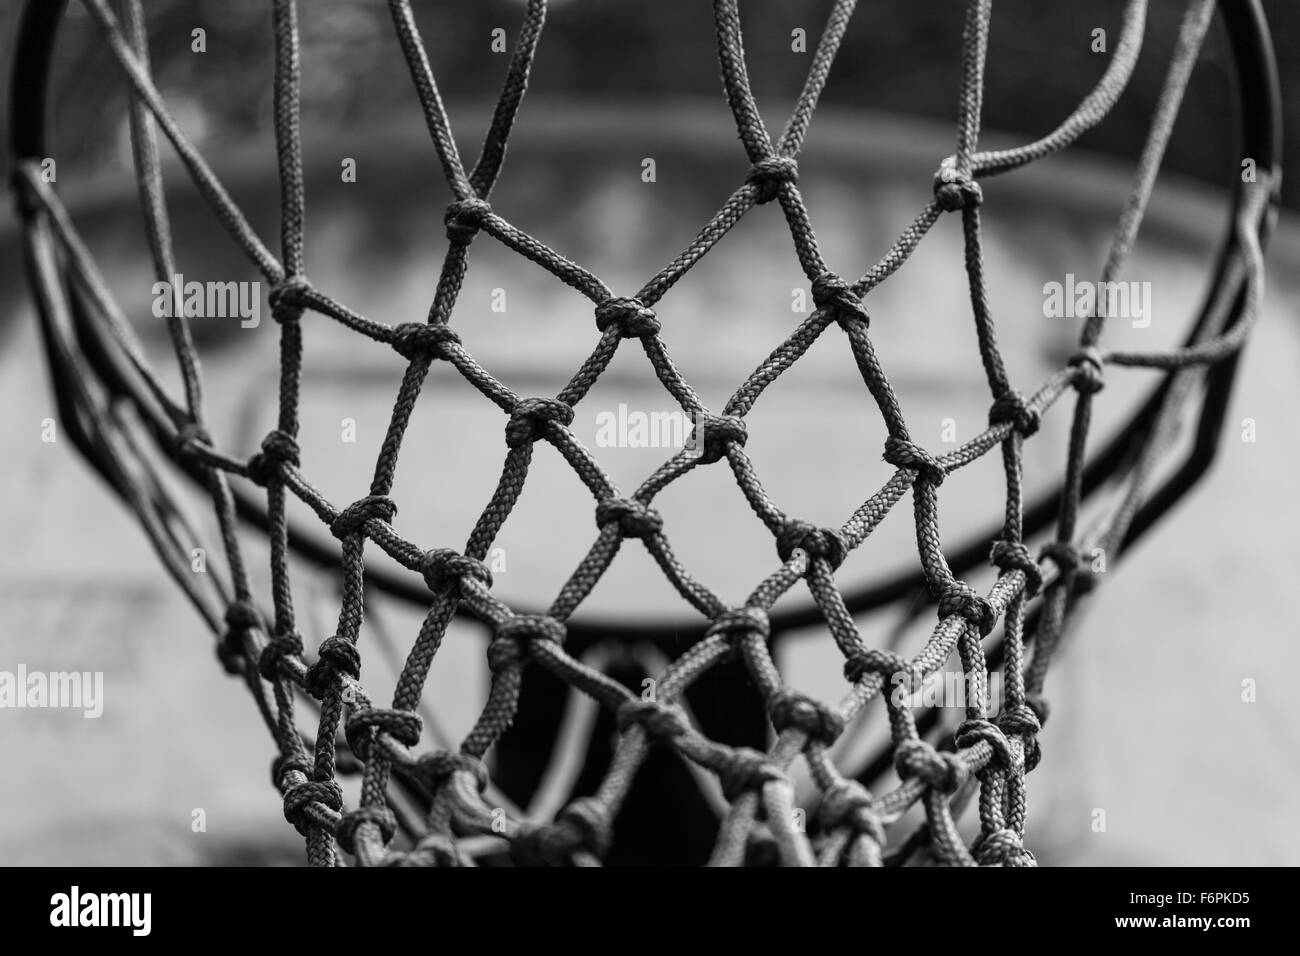 Abstract black and white image of a basketball net Stock Photo